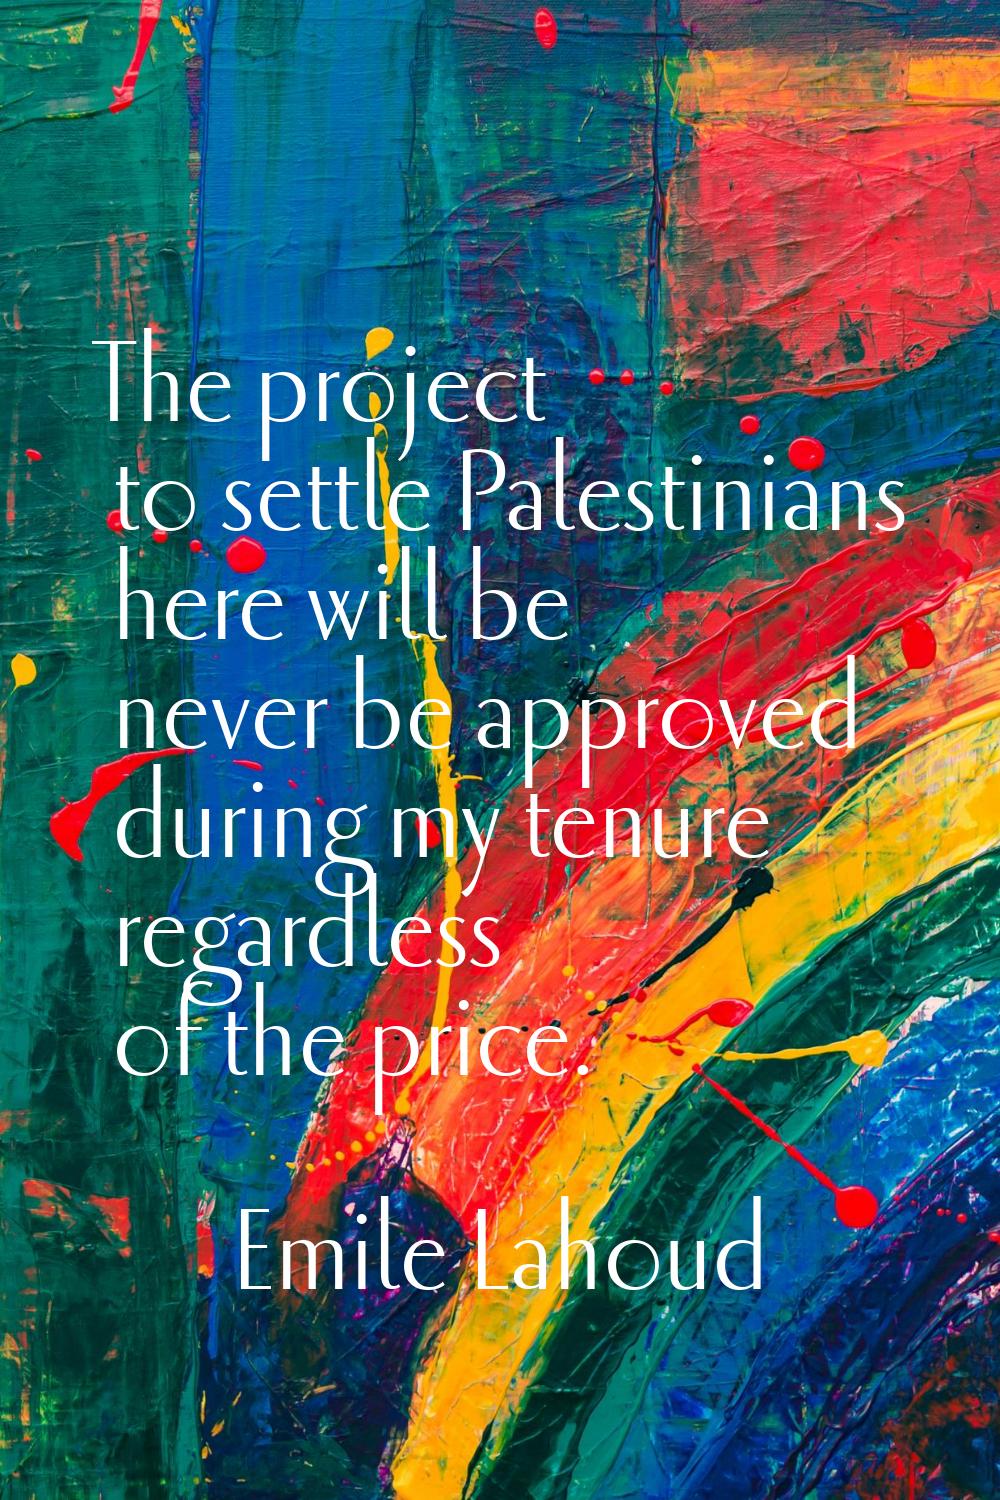 The project to settle Palestinians here will be never be approved during my tenure regardless of th